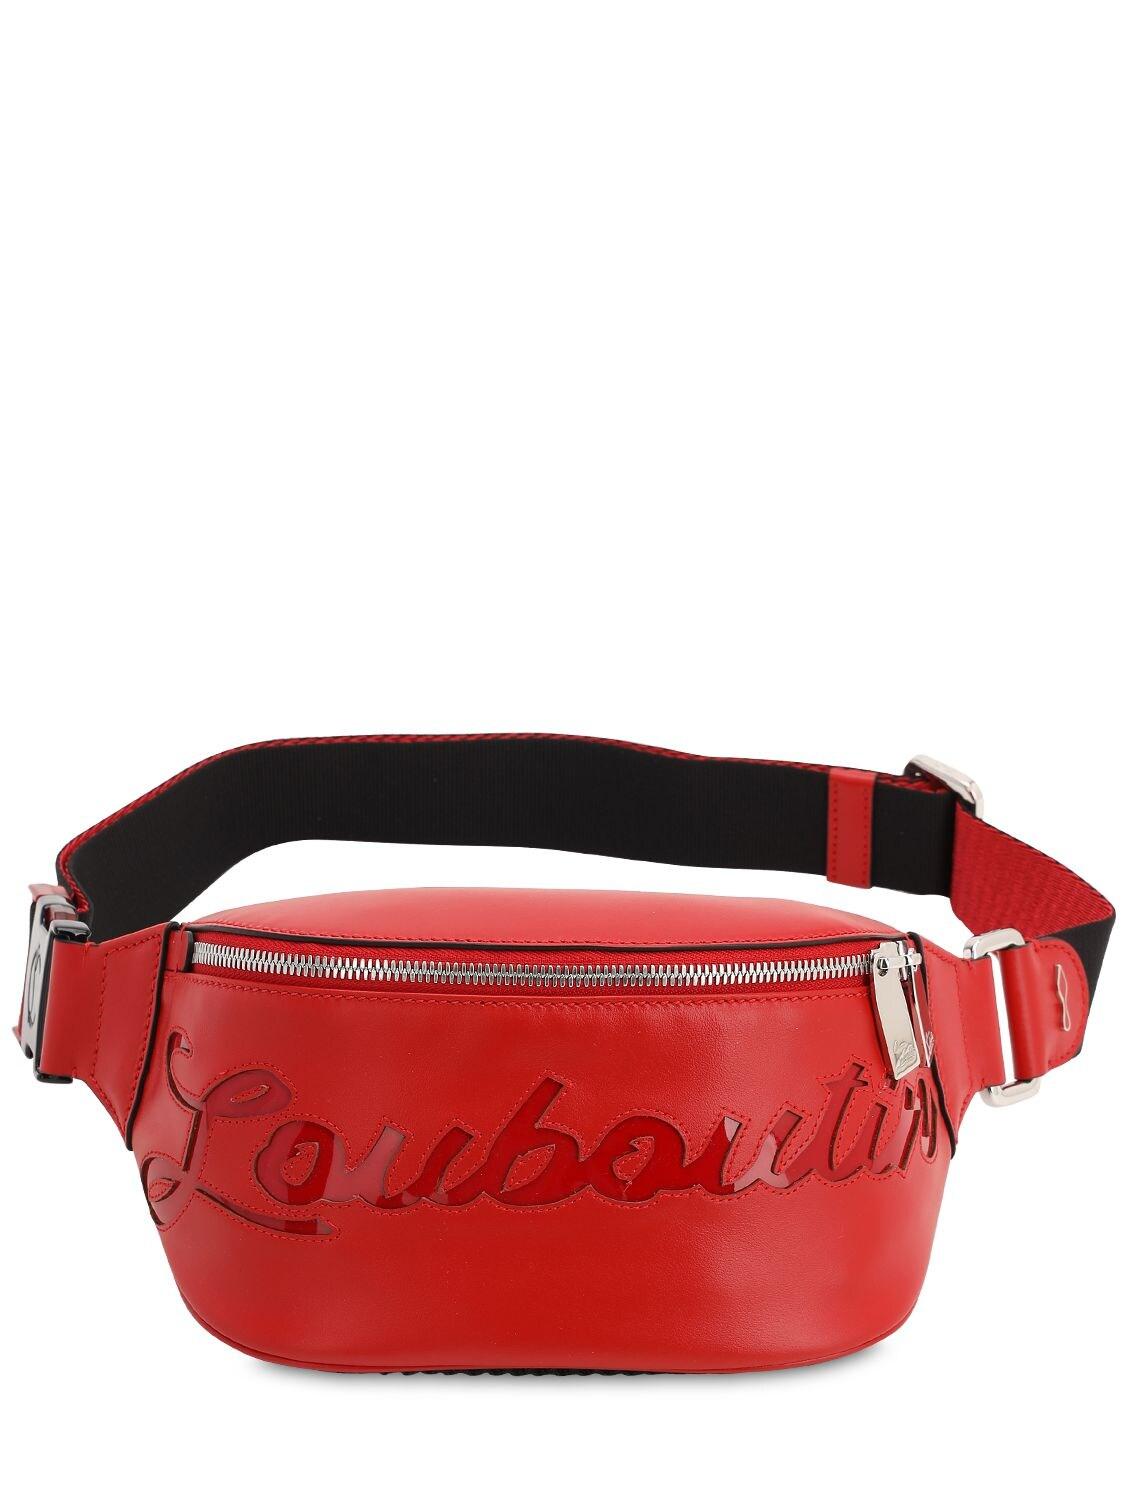 Christian Louboutin Marie Jane Leather Belt Bag in Red | Lyst